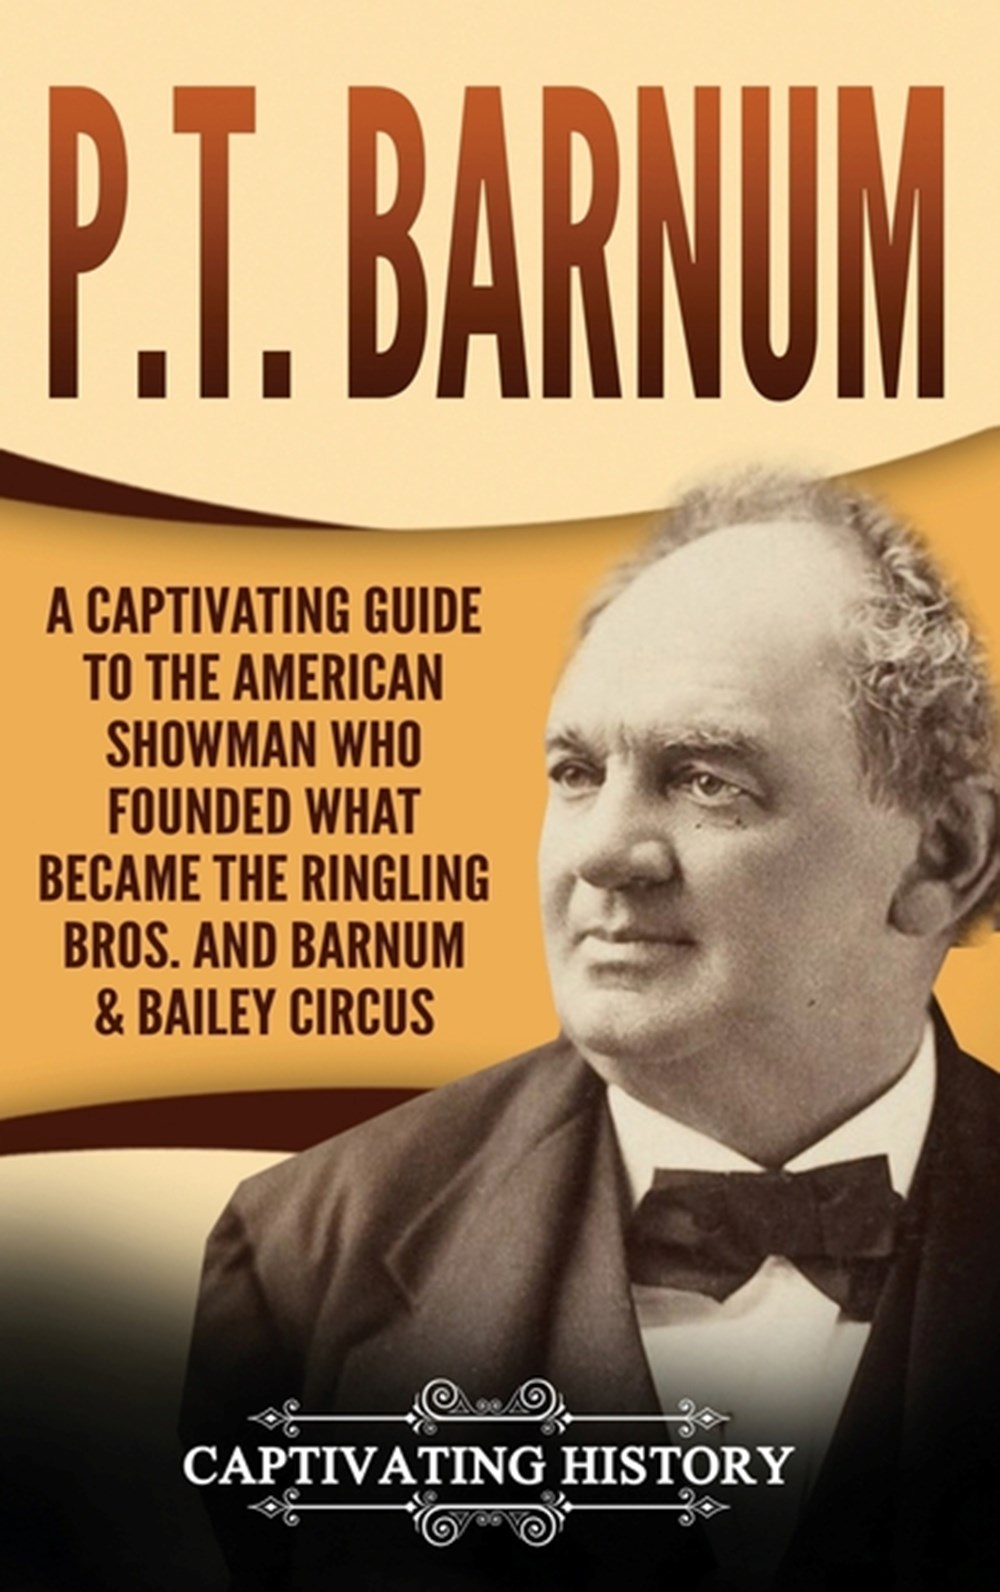 P.T. Barnum: A Captivating Guide to the American Showman Who Founded What Became the Ringling Bros. 